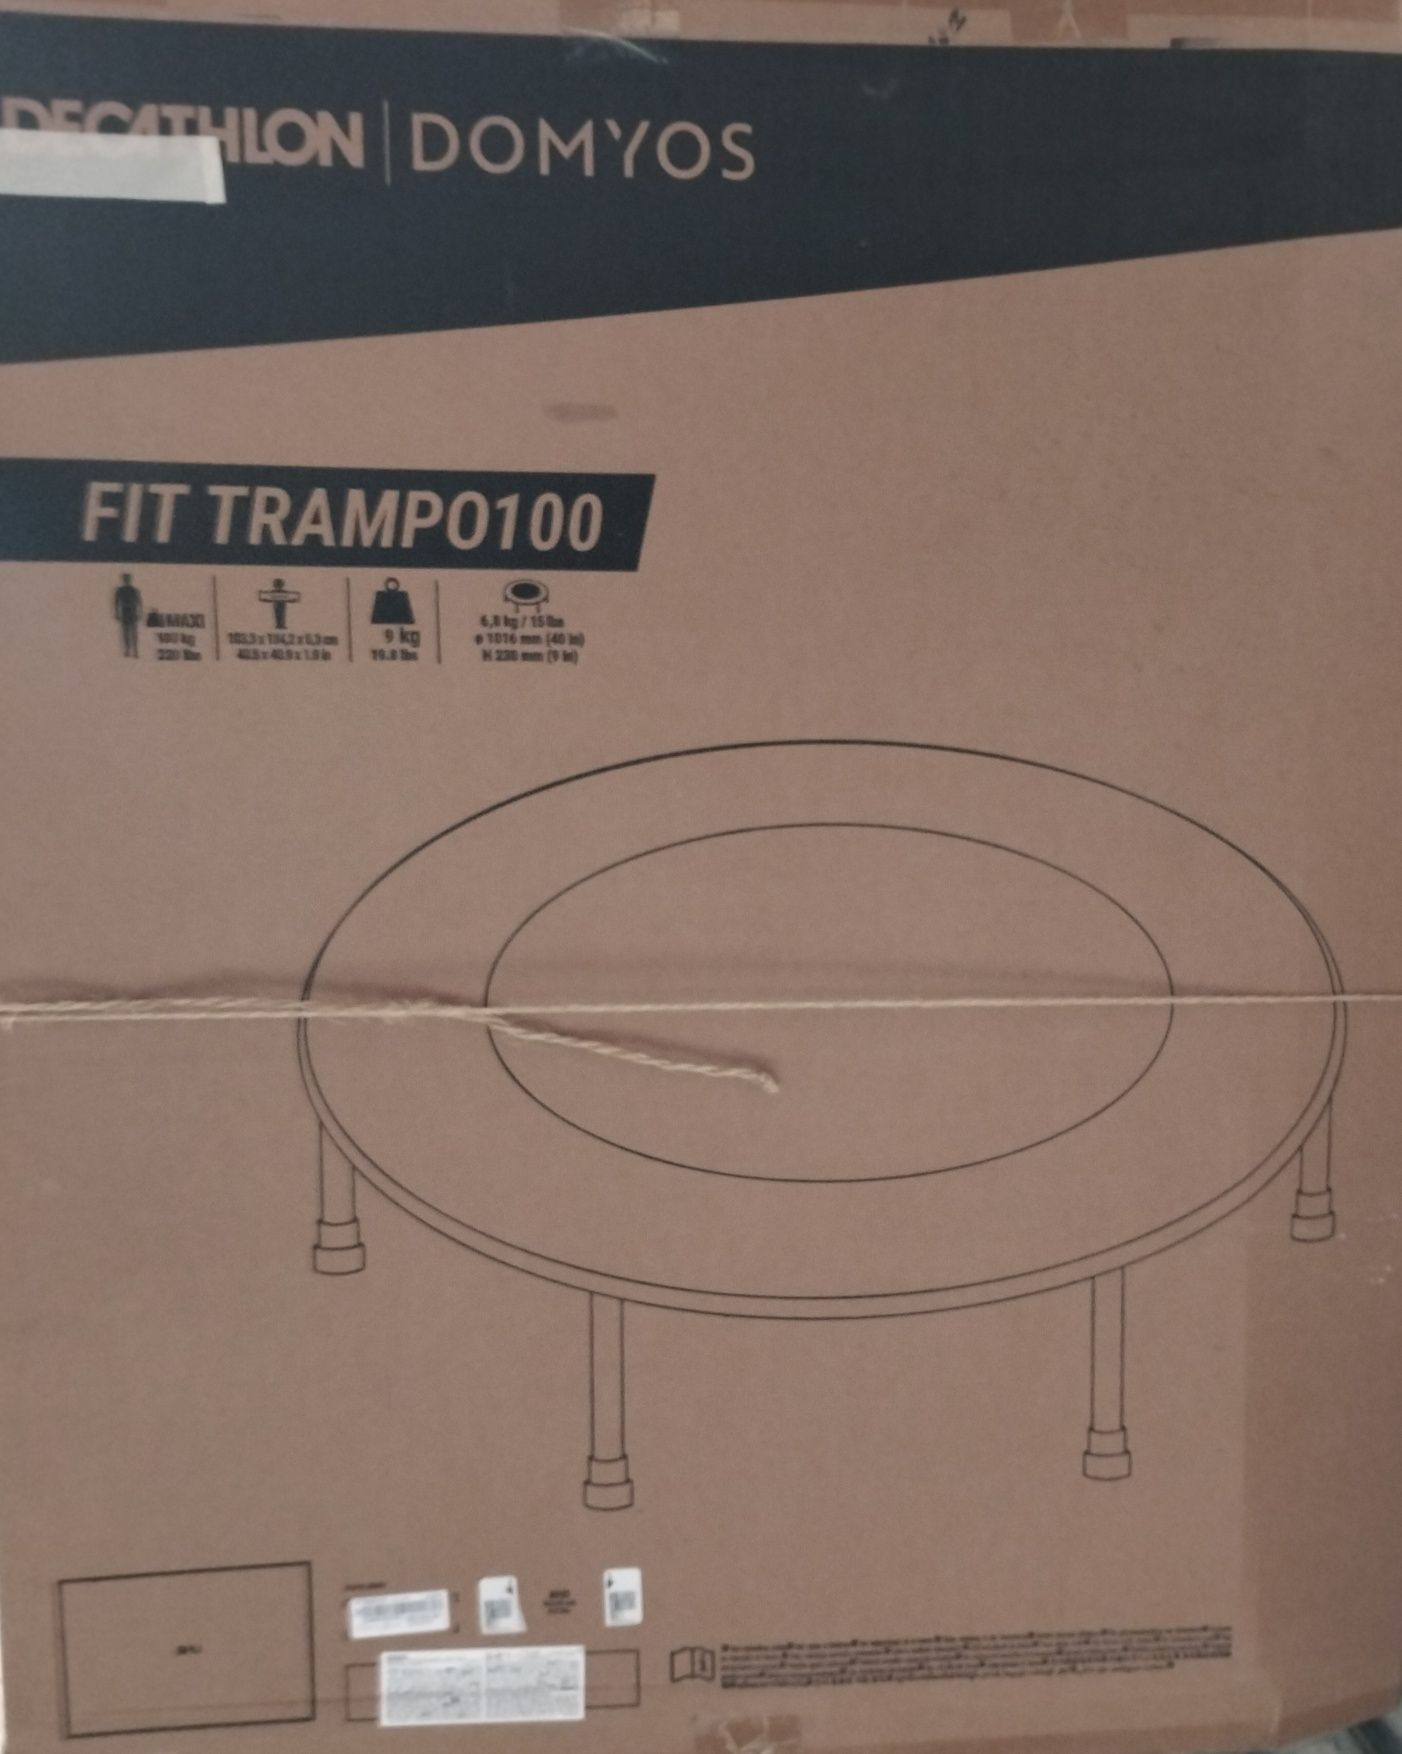 Trampolim FIT TRAMPO100 
trampolim FIT TRAMPO100 trampolim FIT TRAMPO